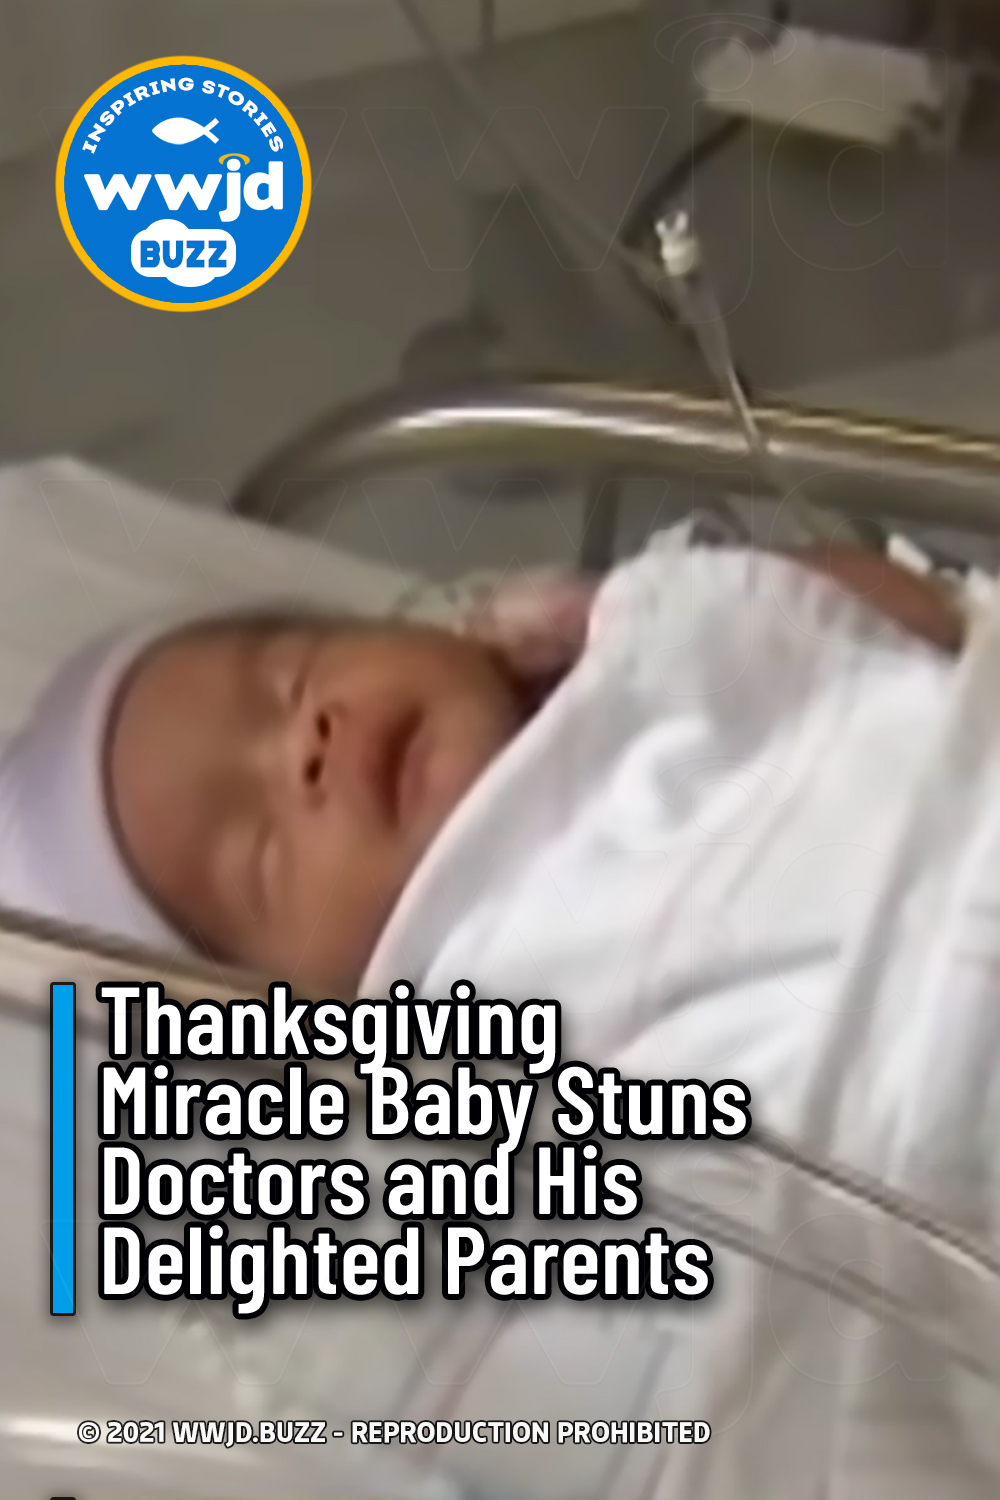 Thanksgiving Miracle Baby Stuns Doctors and His Delighted Parents